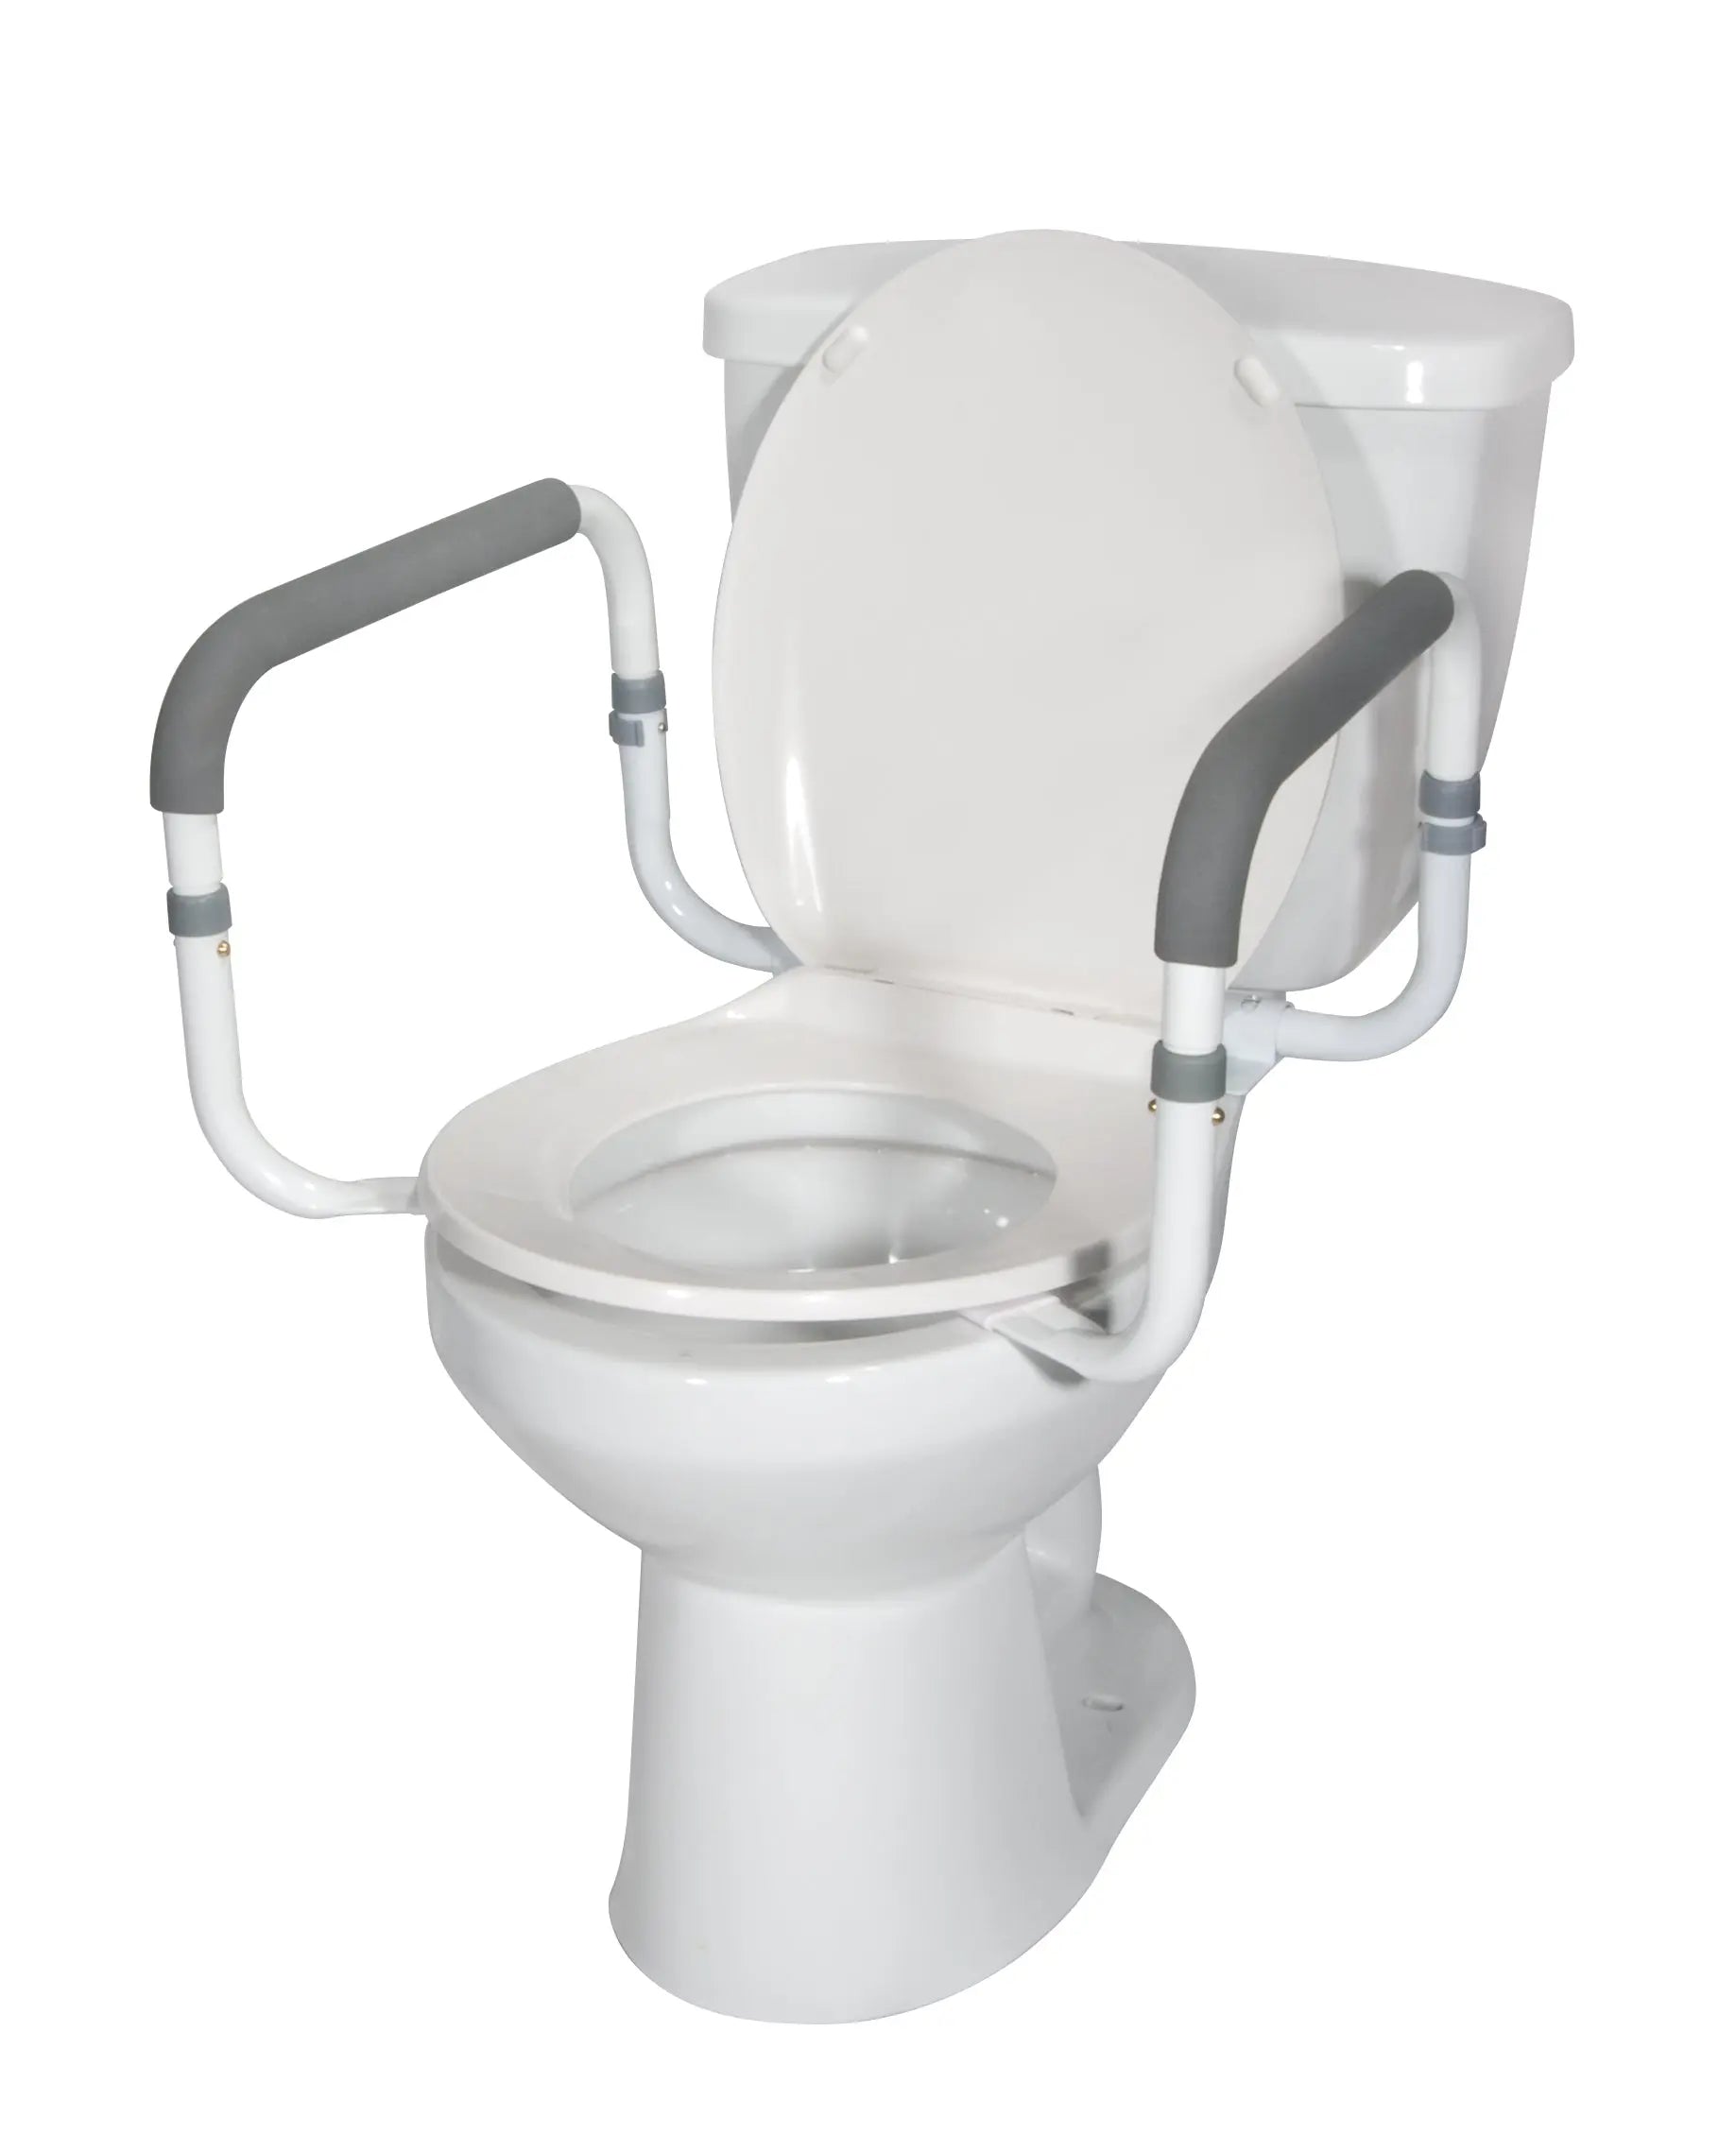 Toilet Safety Rail - Home Health Store Inc